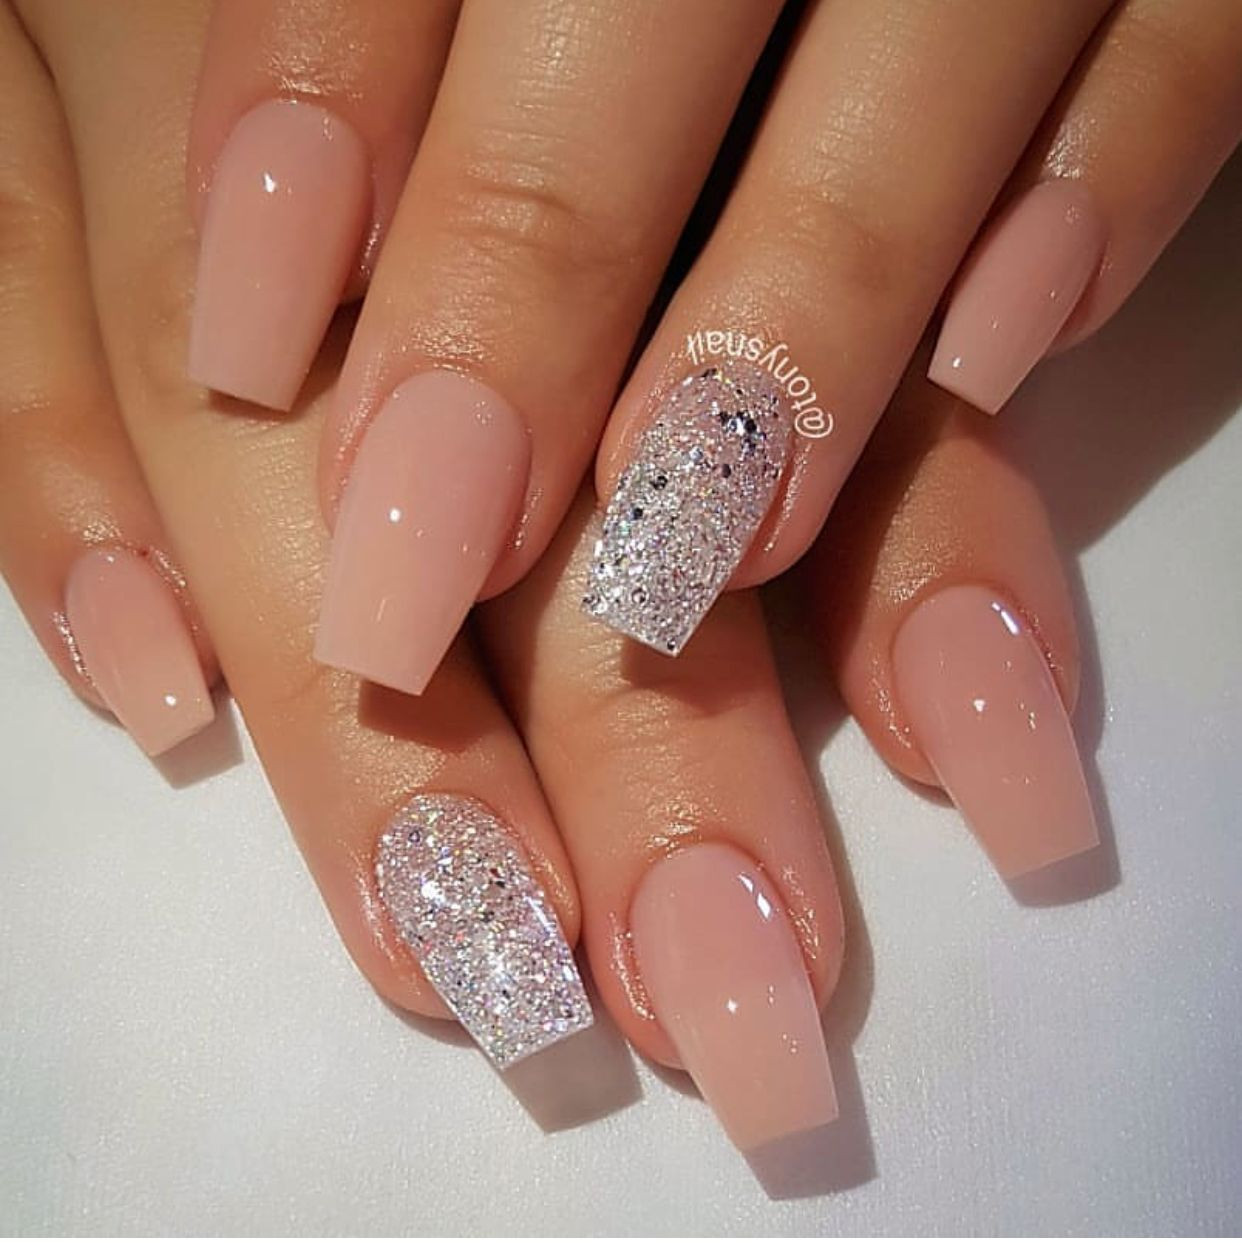 Glitter Pink Nails
 Nail art pink and silver glitter nails in 2019